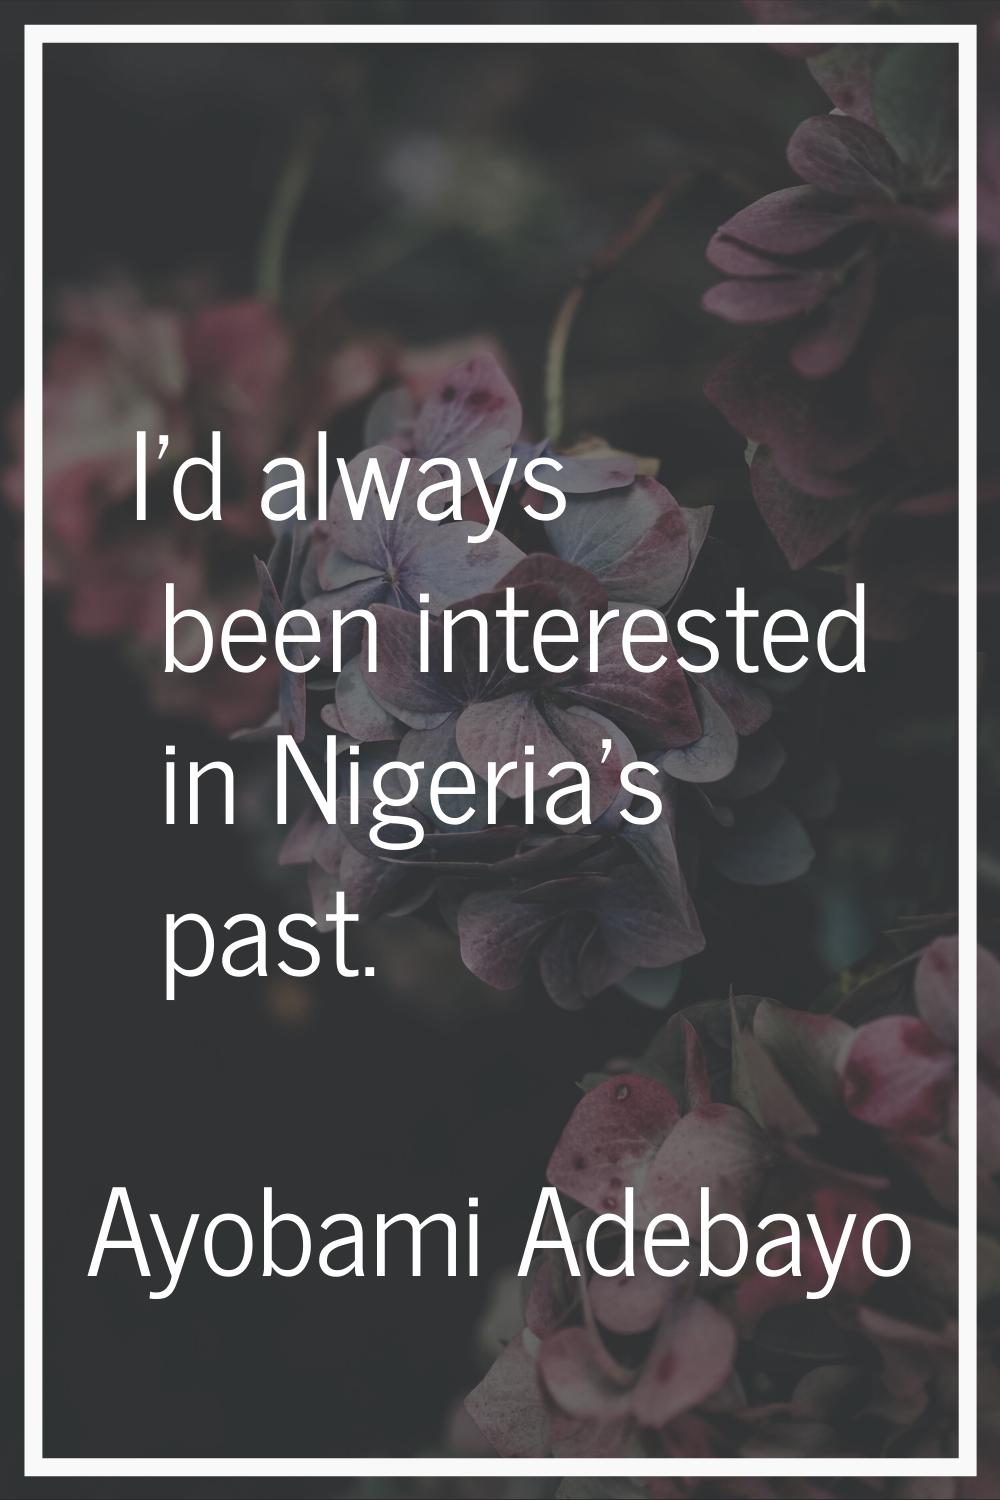 I'd always been interested in Nigeria's past.